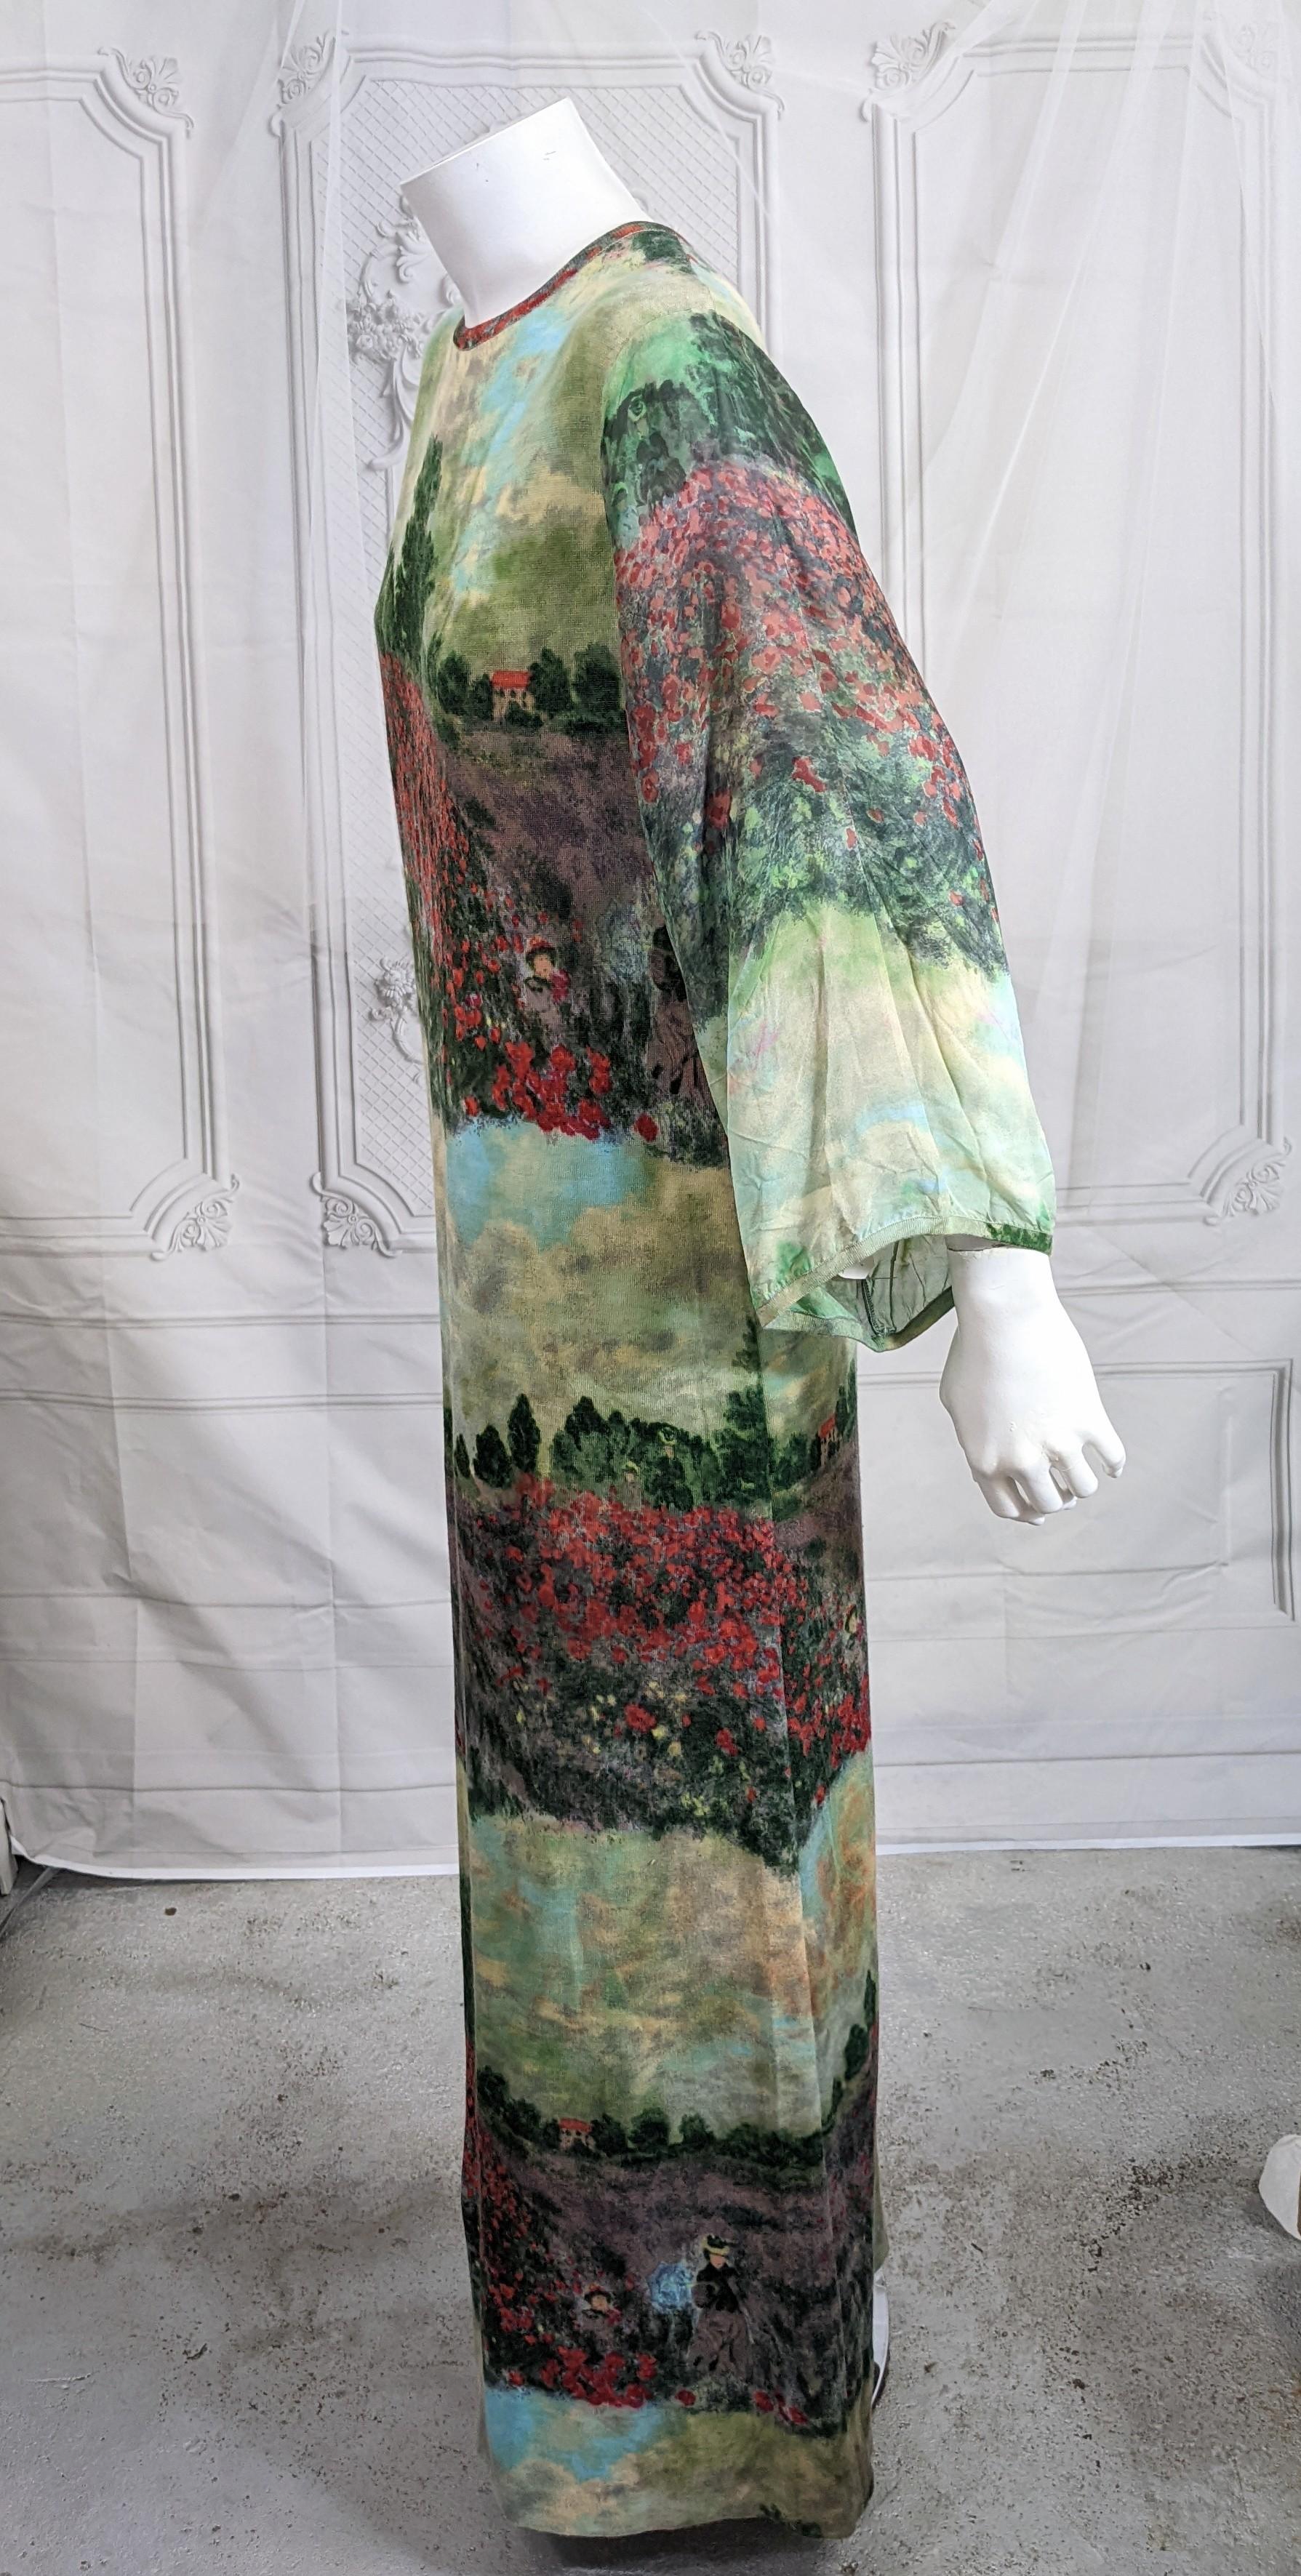 Easy Wool Jersey and Chiffon Monet Landscape Print Gown likely made by Goldworm in the 1970's. Body of dress is soft printed wool jersey with sheer chiffon kimono sleeves in same print edged in knit trim. Striking and as easy to wear as a T shirt. 